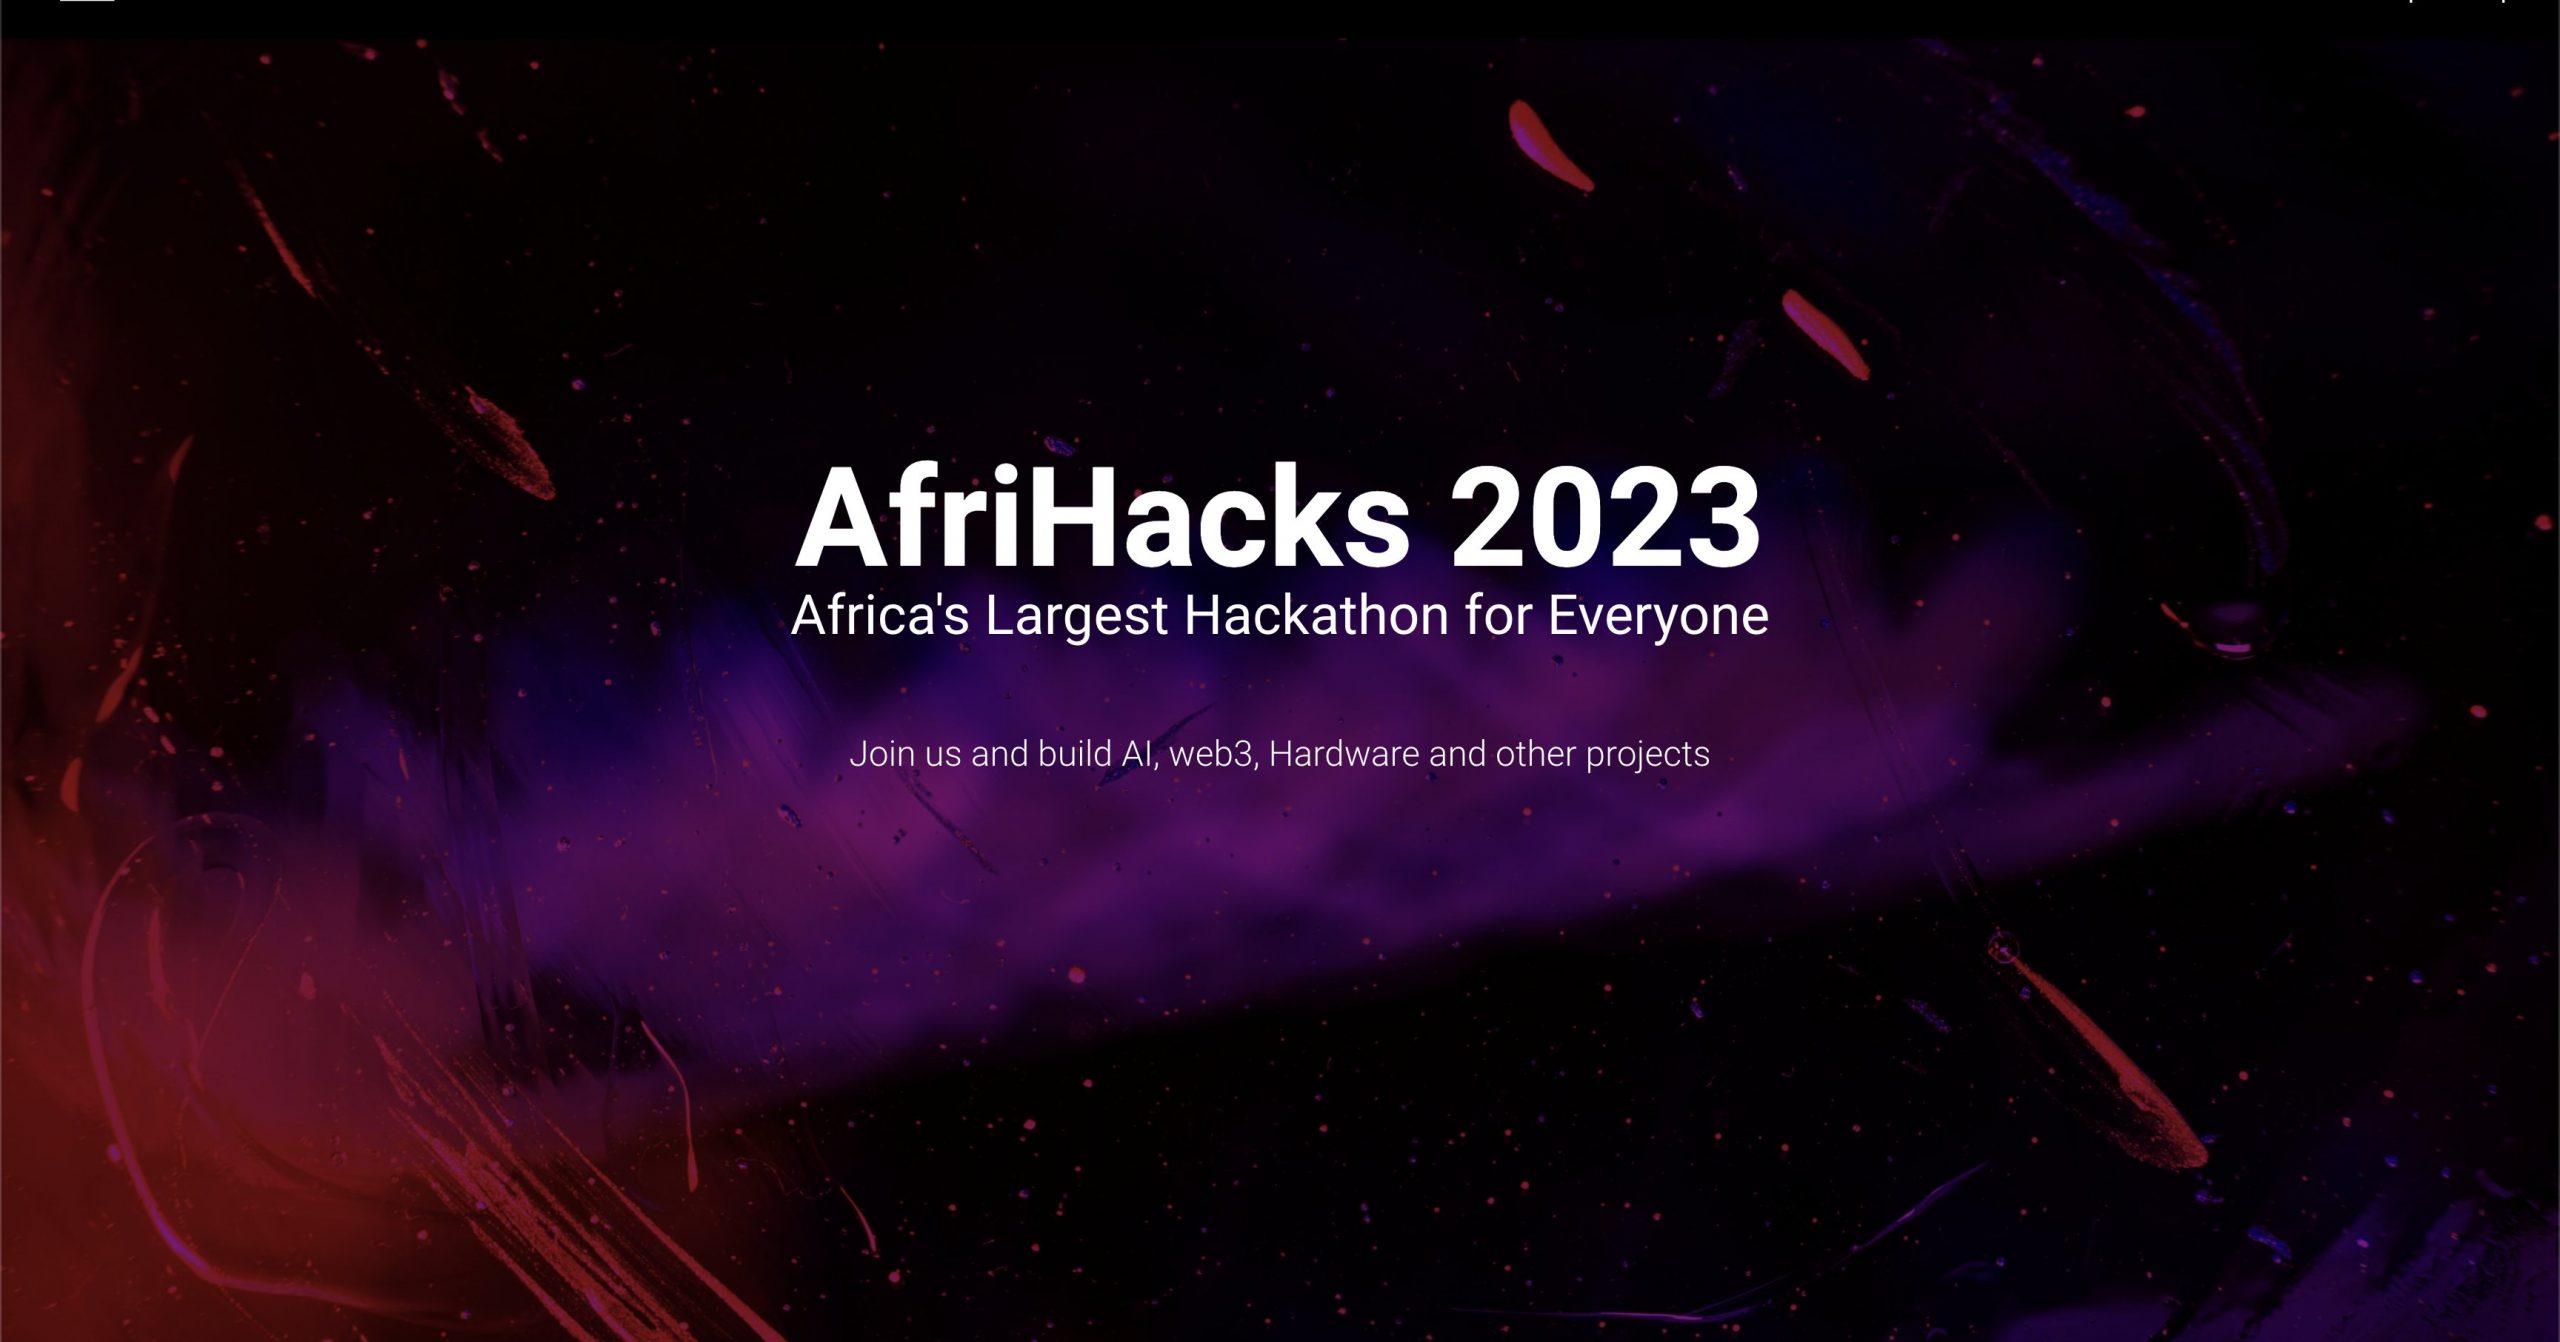 Promotional graphic for AfriHacks 2023, branding it as Africa's largest hackathon for everyone with a call to join and build AI, web3, hardware, and other projects.